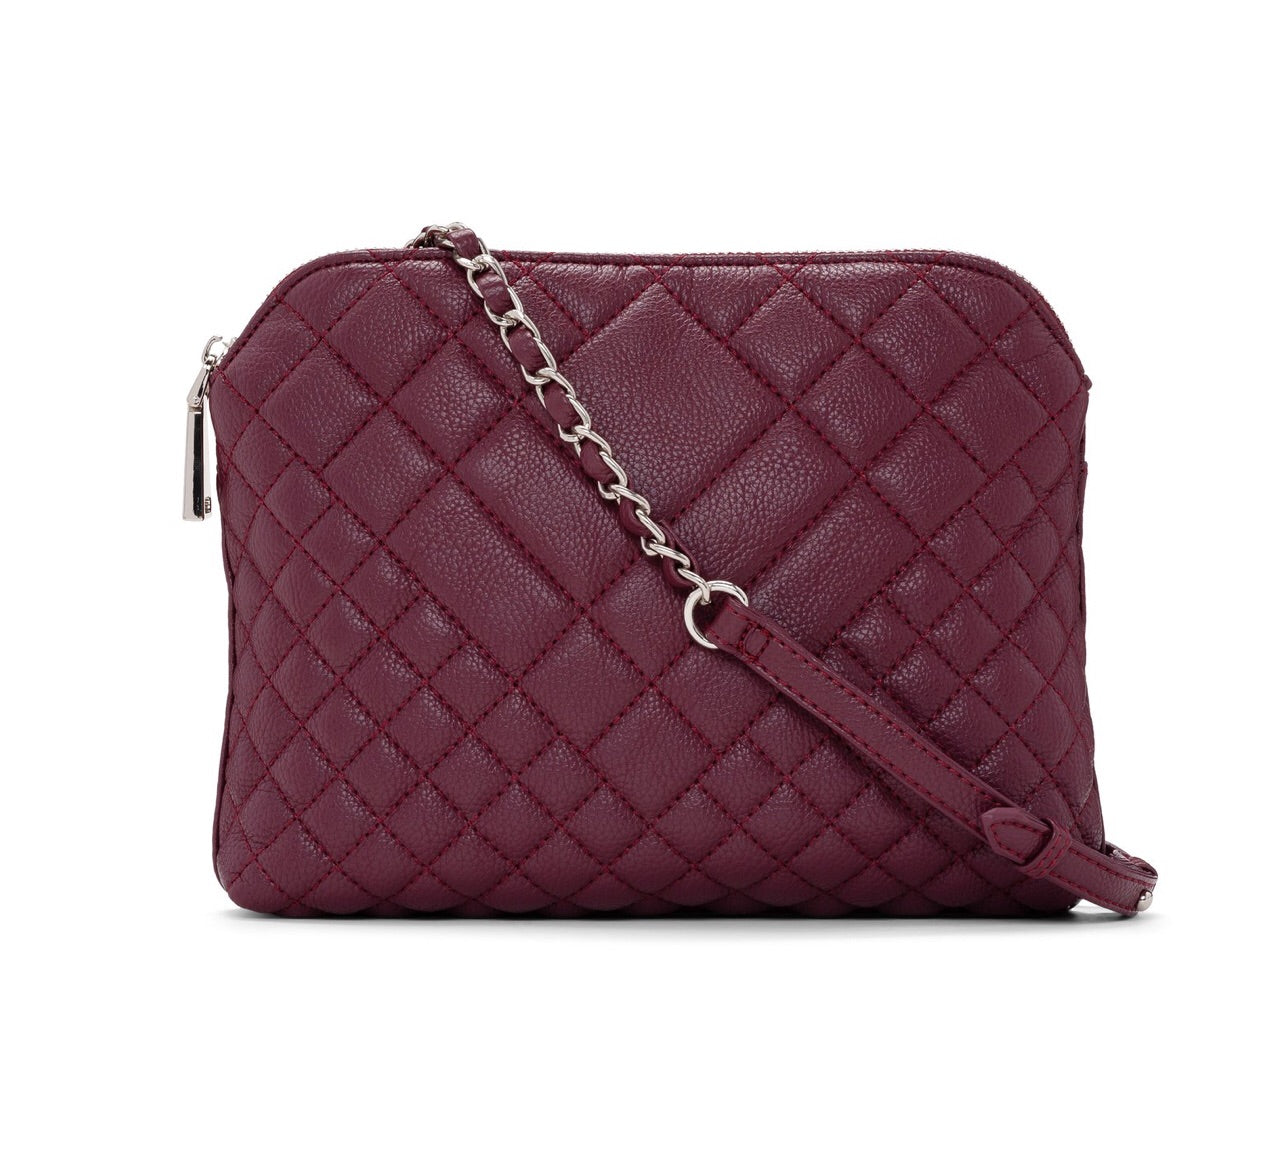 QUILTED BASIC CROSSBODY - WINE